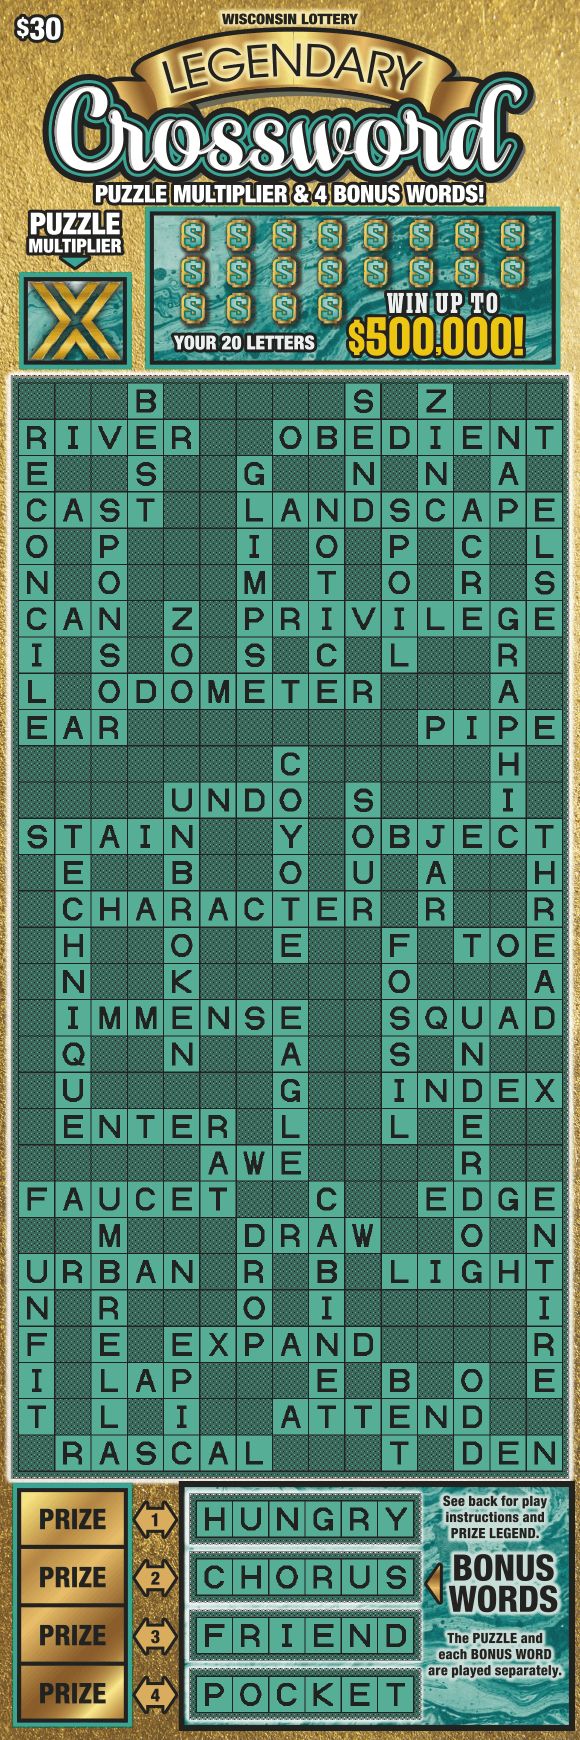 gold banner with black block text and white scripted lettering outlined in teal above extra tall teal crossword puzzle with teal dollar sign icons outlined with gold on scratch game